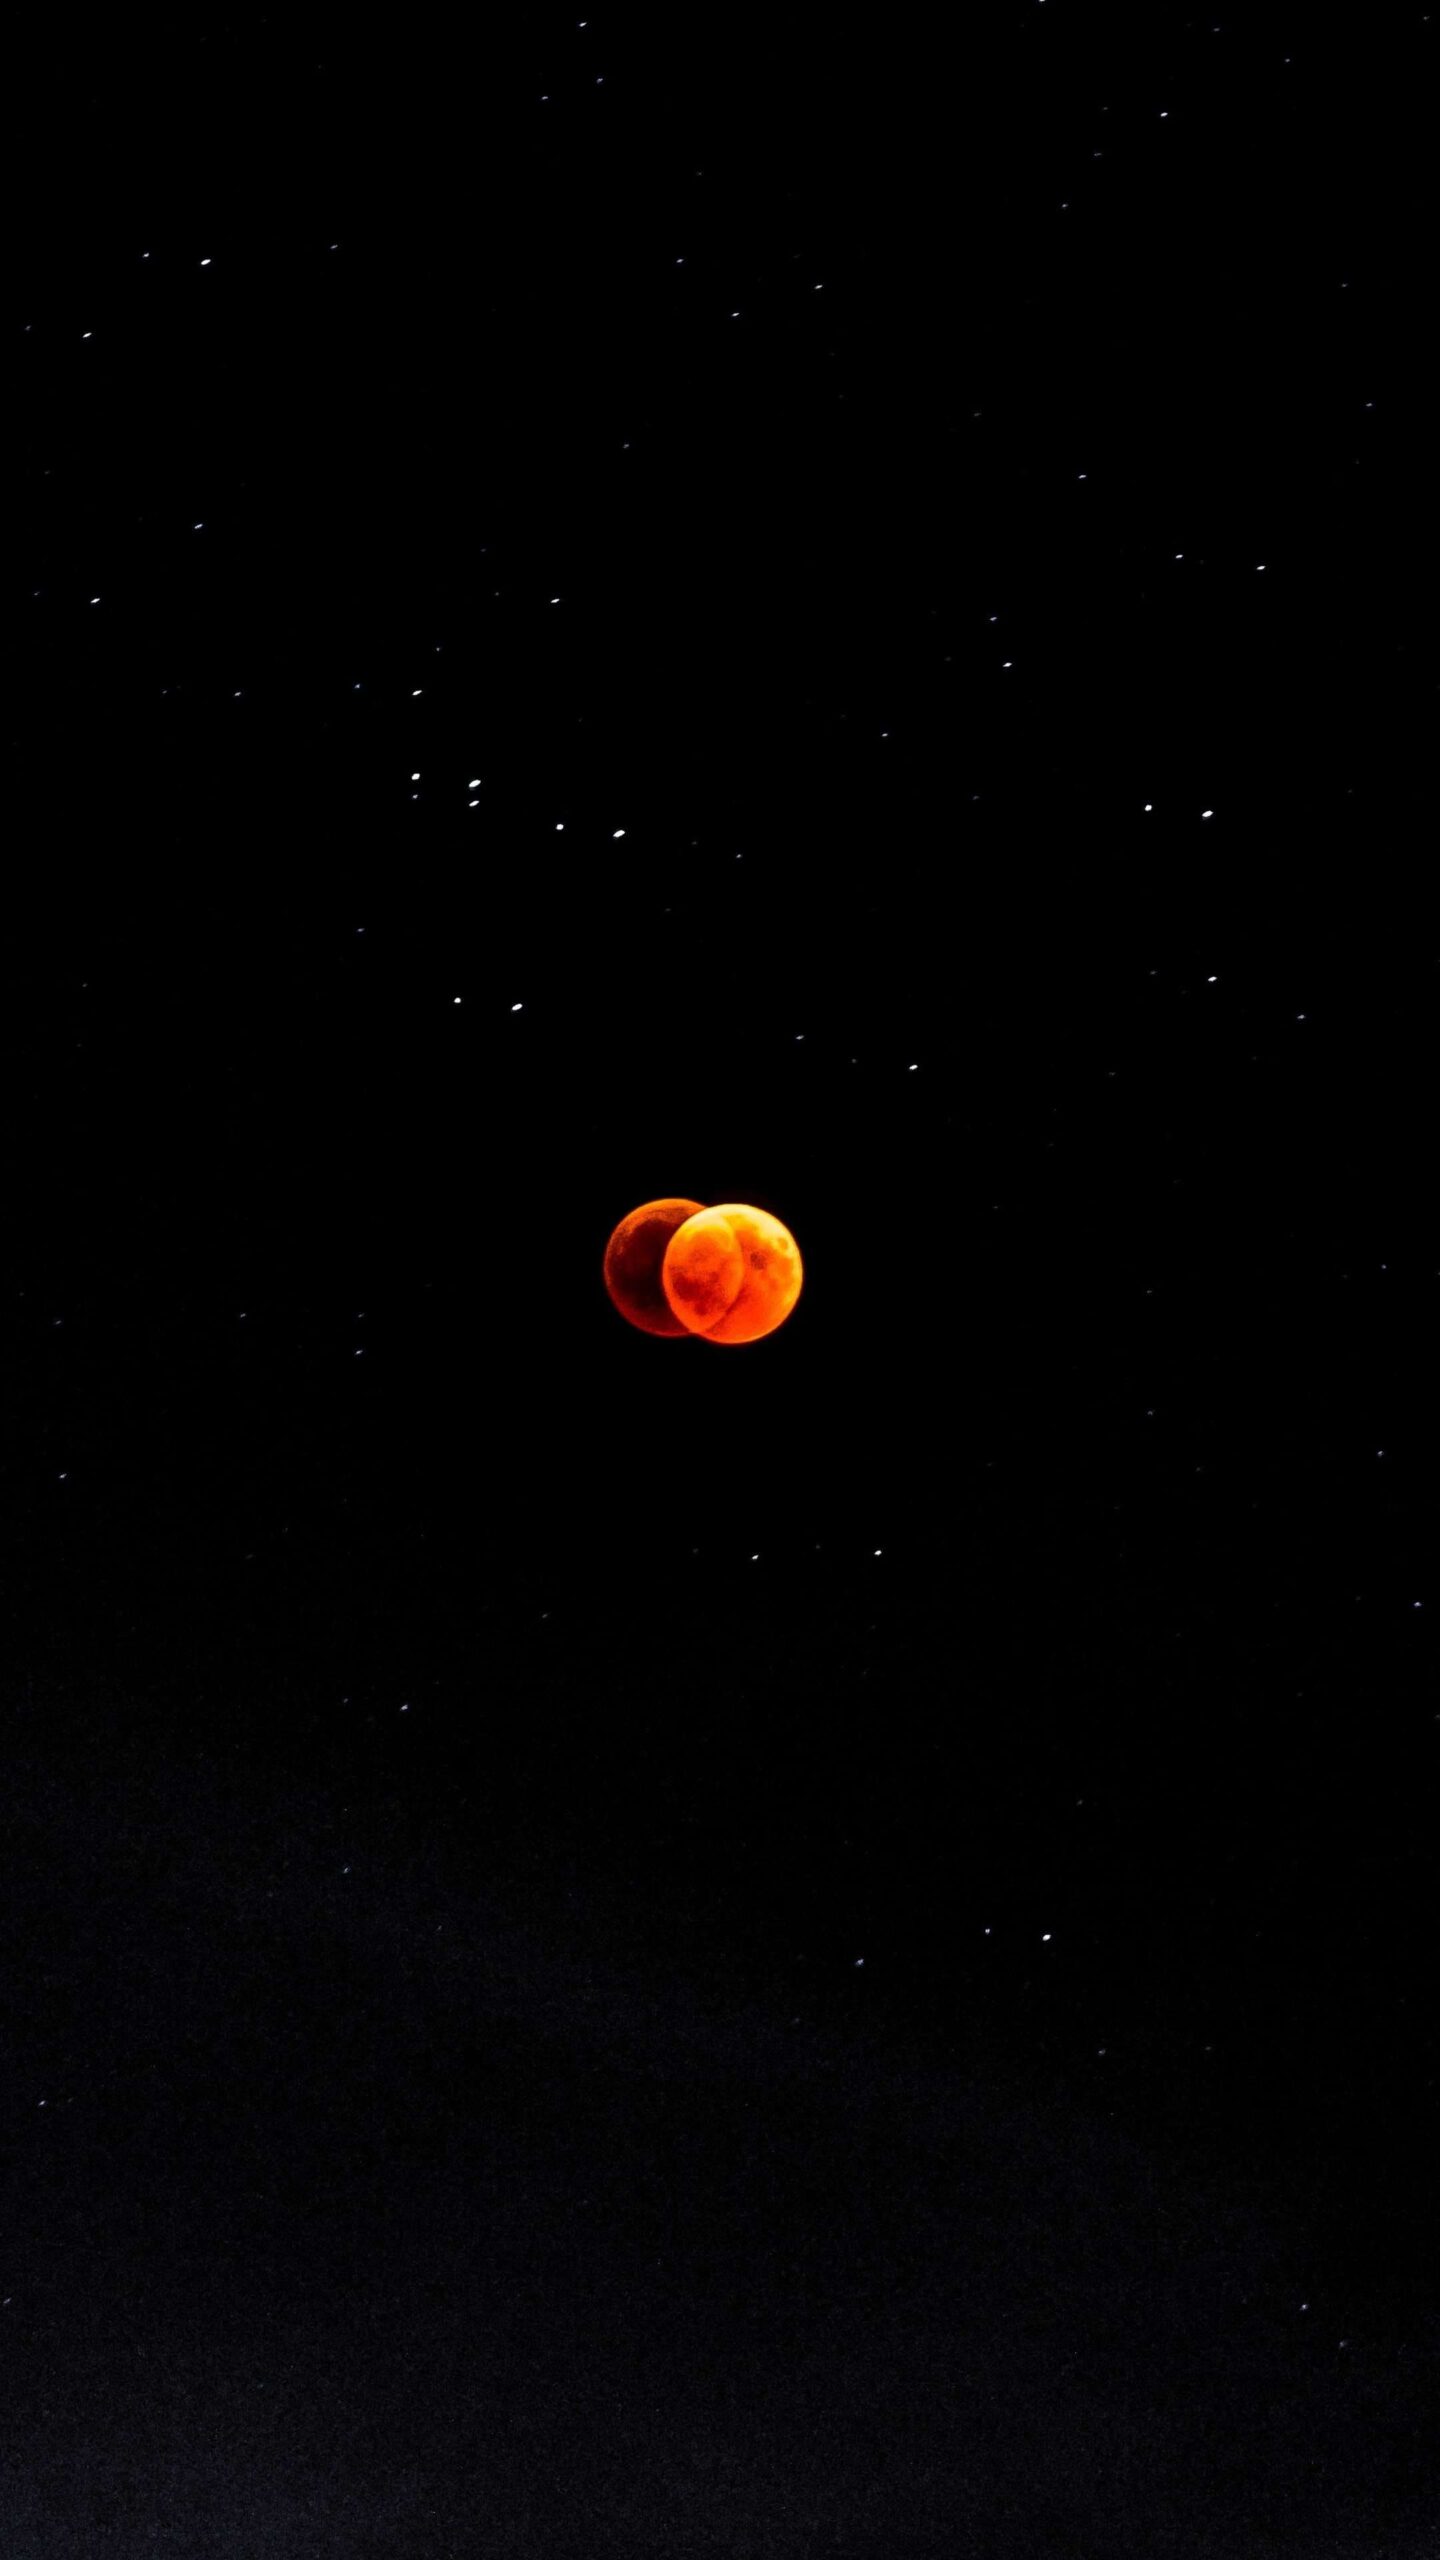 Amoled Red Moon Eclipse 4K iPhone 13 Wallpaper, Best iPhone Wallpaper and iPhone background, WallpaperUpdate, Best iPhone Wallpaper and iPhone background